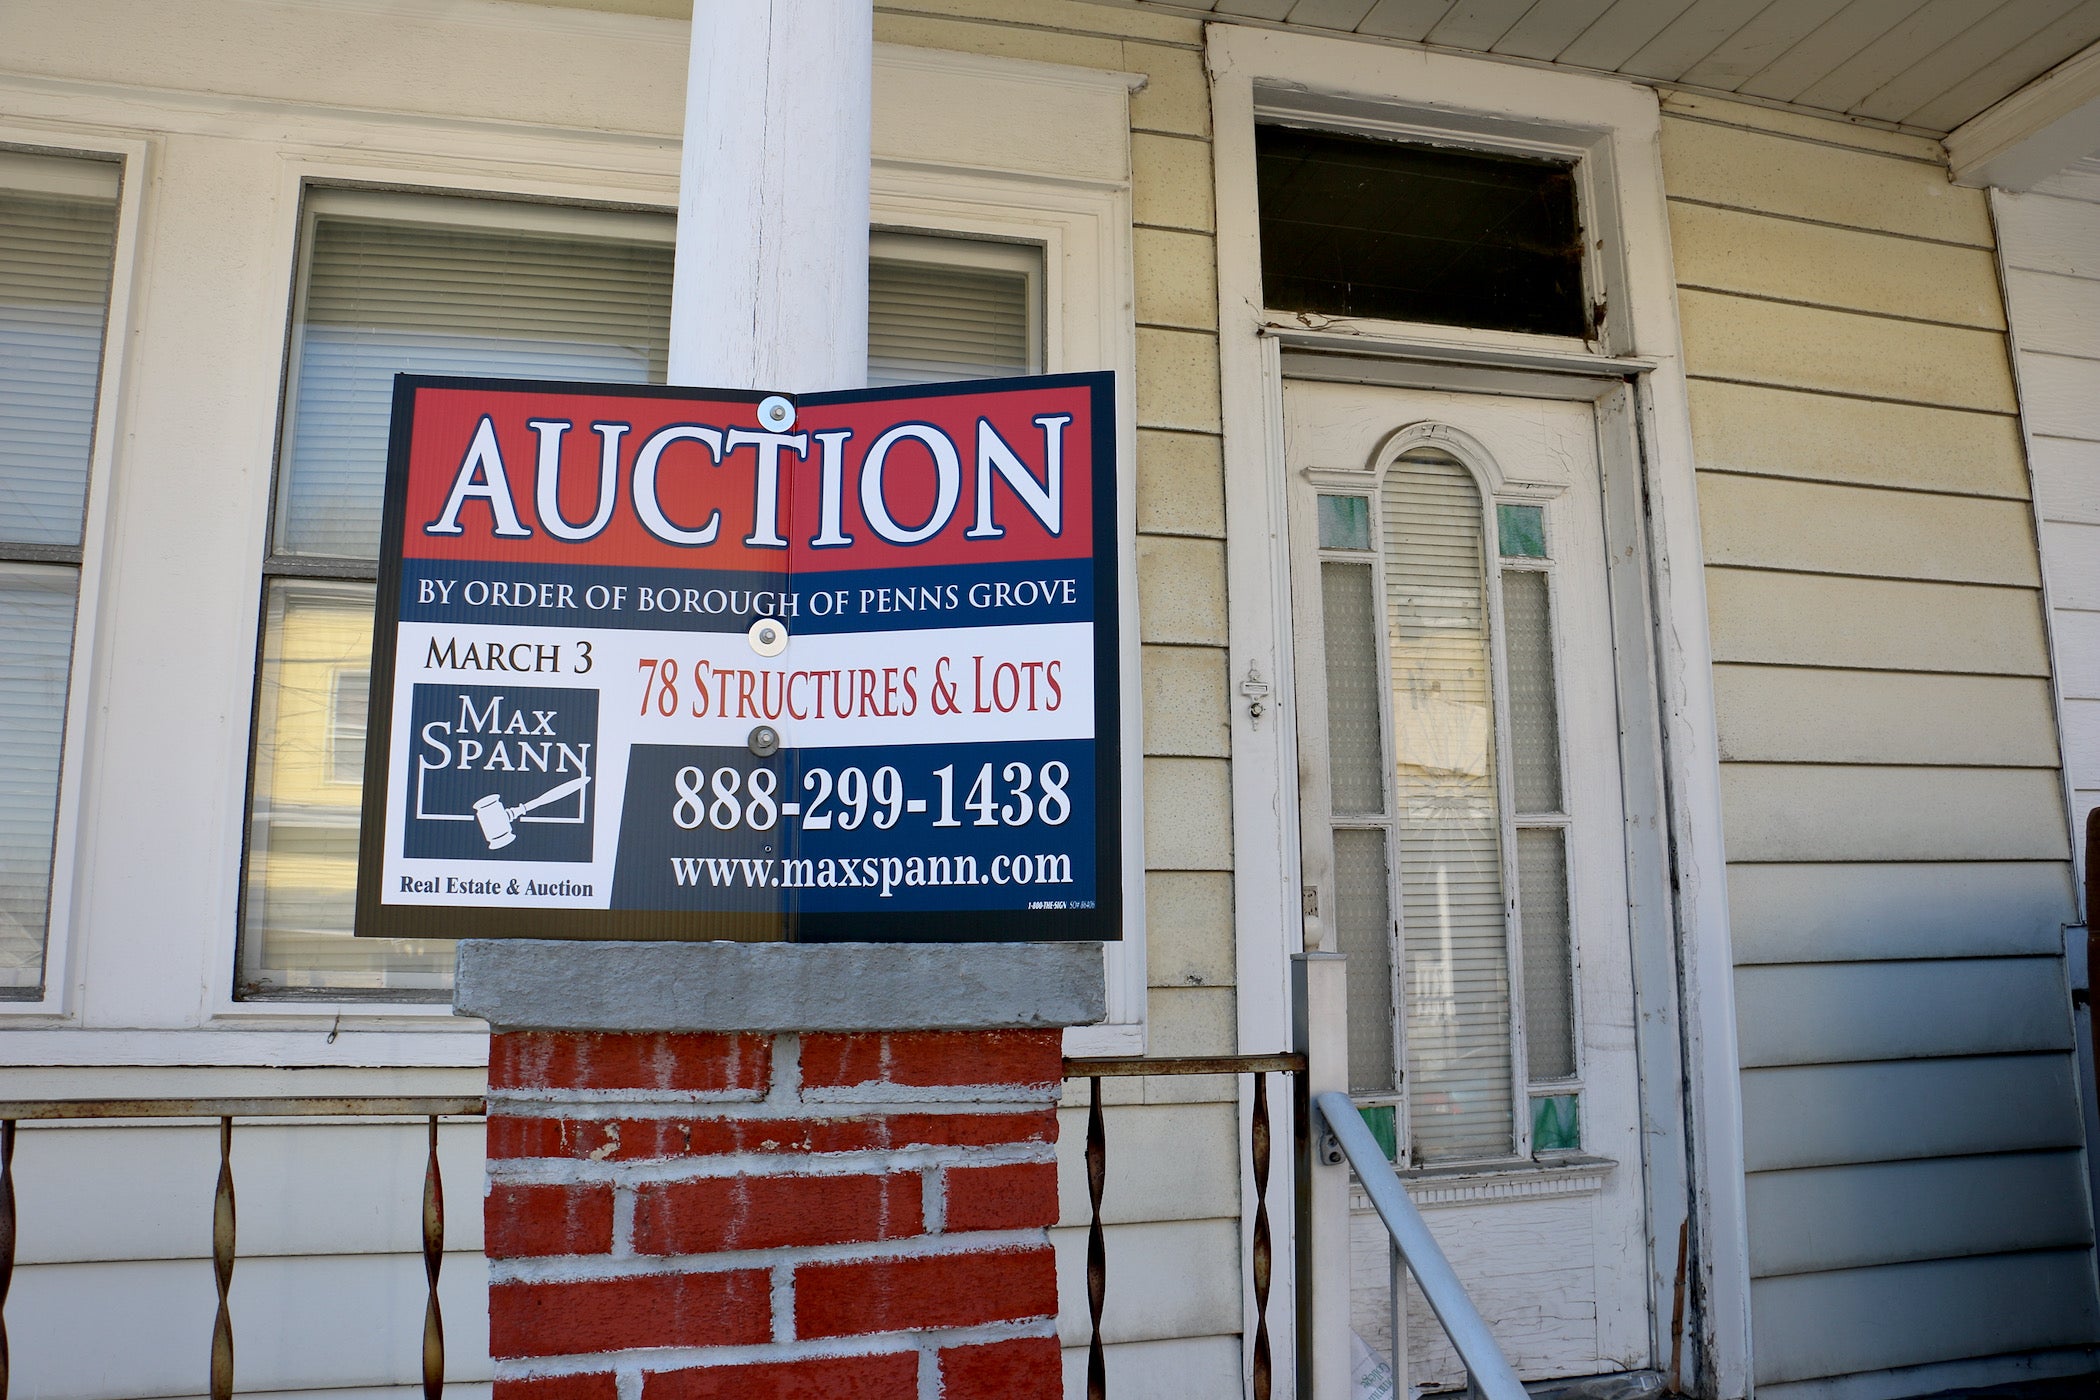 Penns Grove auctions off vacant properties - WHYY